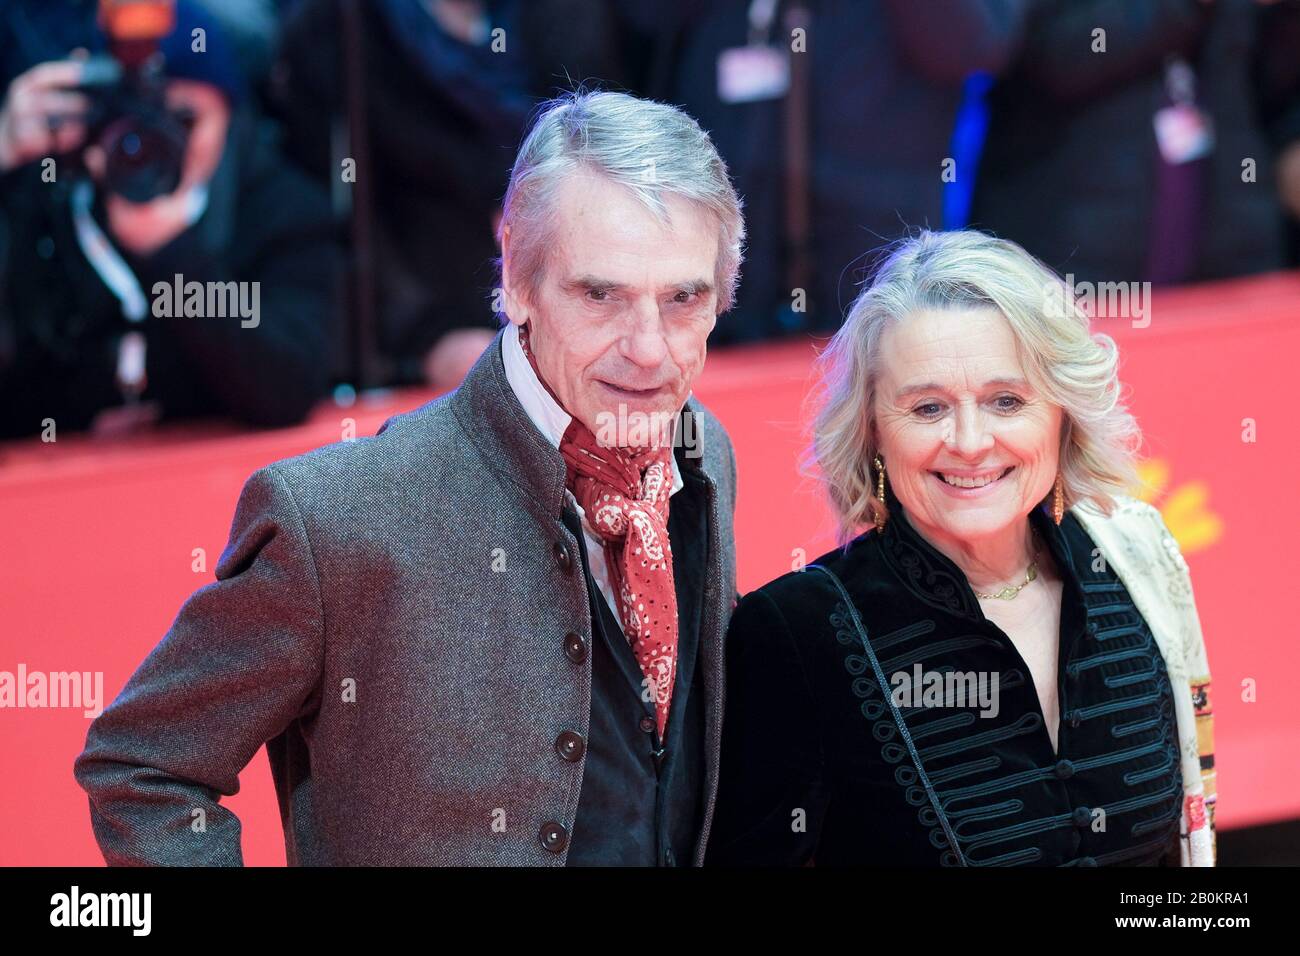 Berlinale Palast, Potsdamer Platz, Berlin, Germany. 20th Feb, 2020. Jeremy Irons, Jury President with wife Sinead Cusack arriving at the Opening Ceremony, My Salinger Year. Picture by Credit: Julie Edwards/Alamy Live News Stock Photo